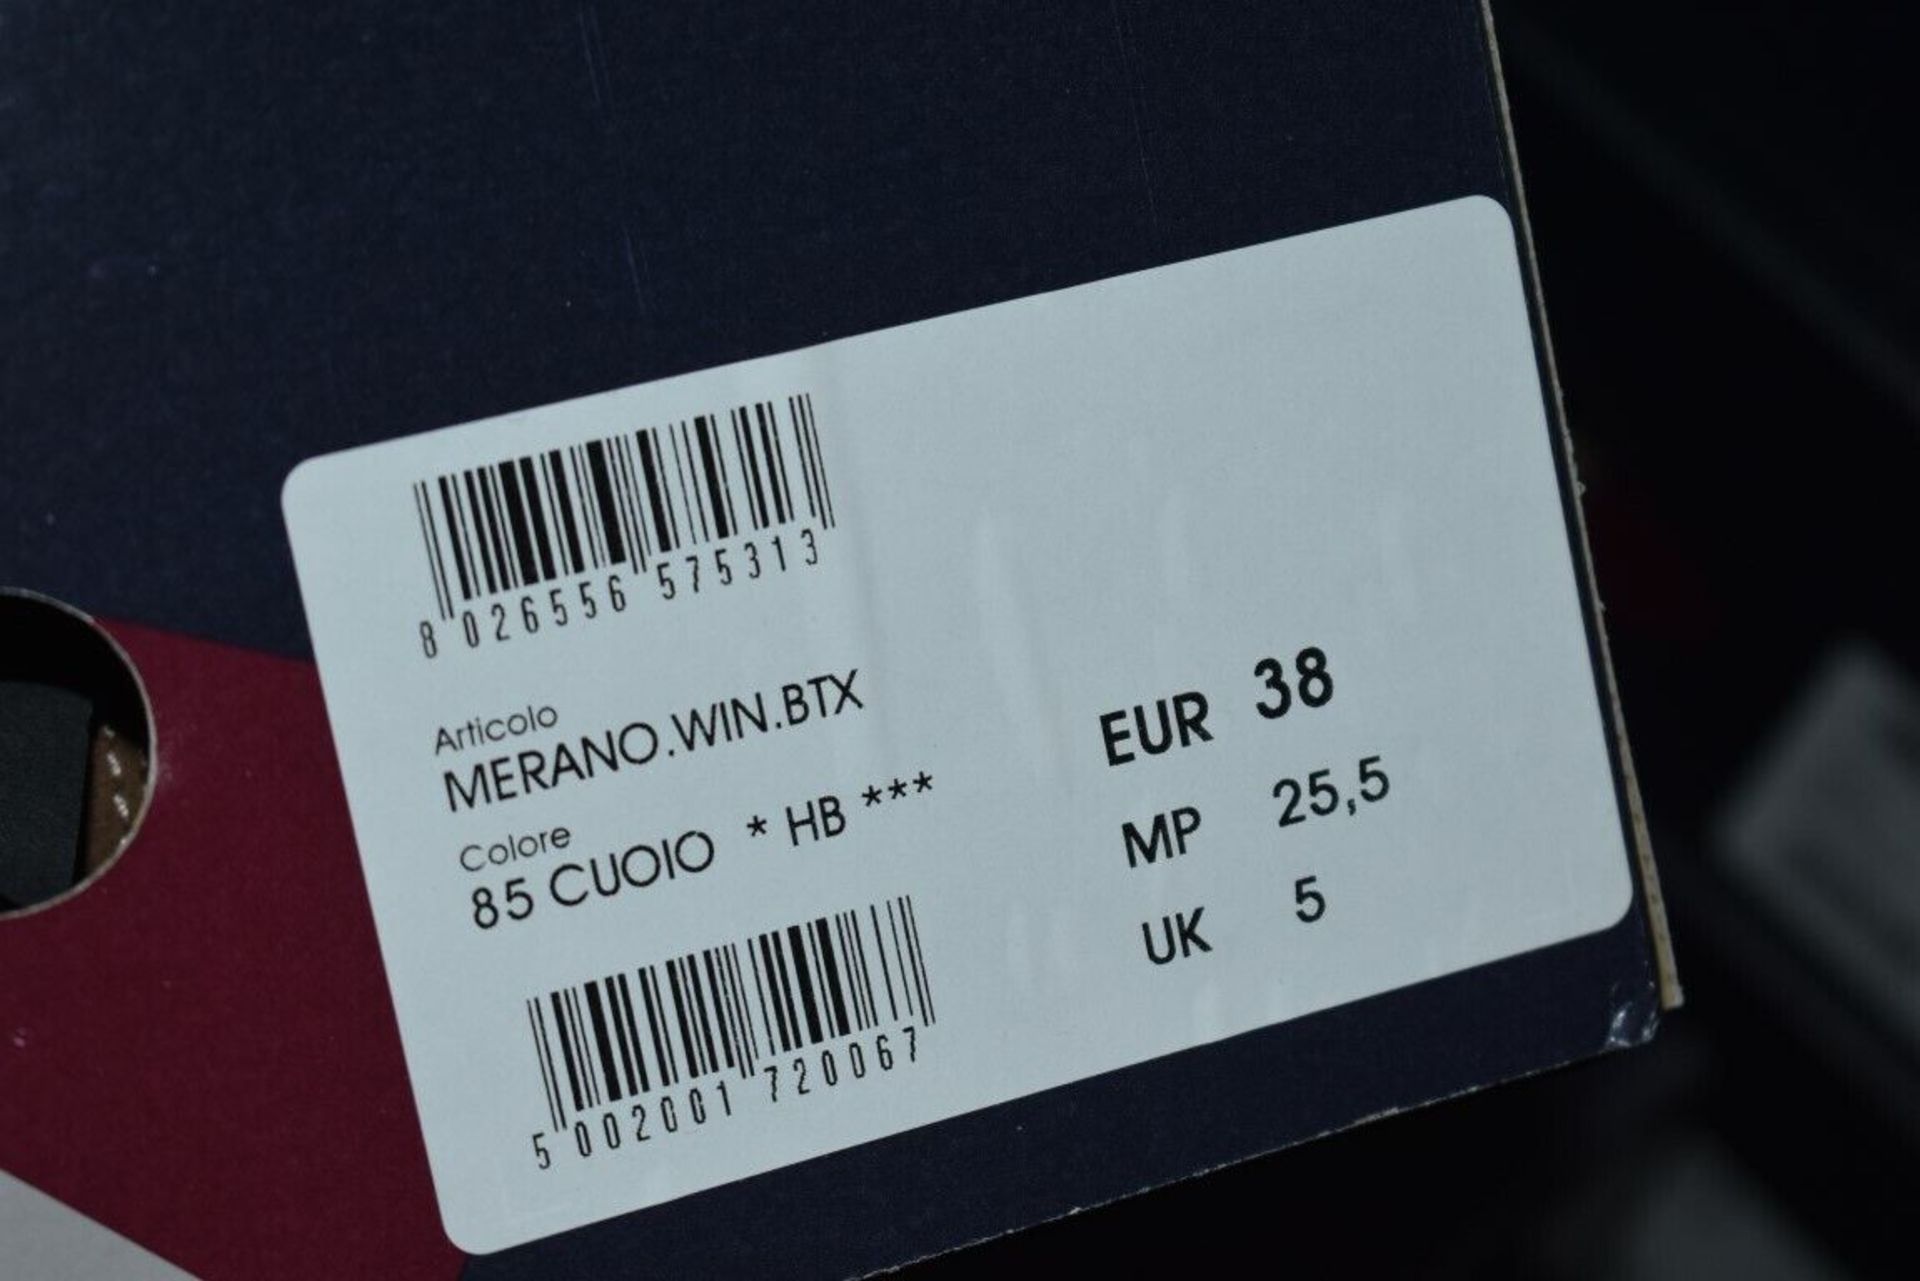 1 x Pair of Designer Olang Women's Winter Boots - Merano.Win.BTX 85 Cuoio - Euro Size 38 - New Boxed - Image 2 of 3